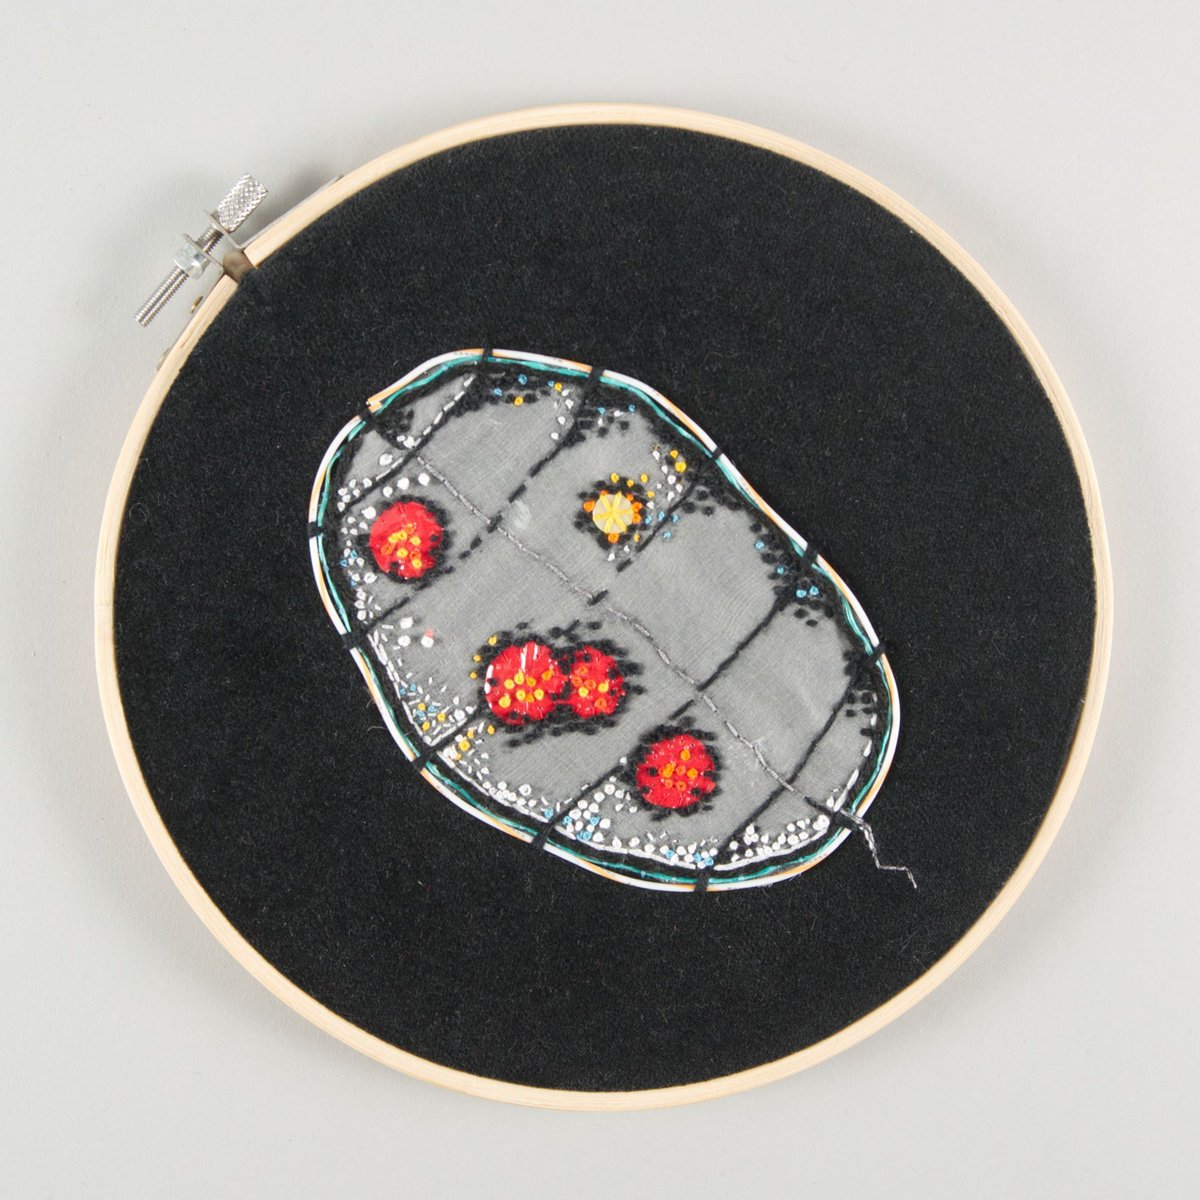 This #ForthFriday #100Species is the Dinoflagellate. This embroidery by Kathleen Wilson shines a light on this microscopic phytoplankton. This single-cell organism is an important link in the marine food chain. Come and see our temporary exhibition by Edinburgh Shoreline #SeaLife